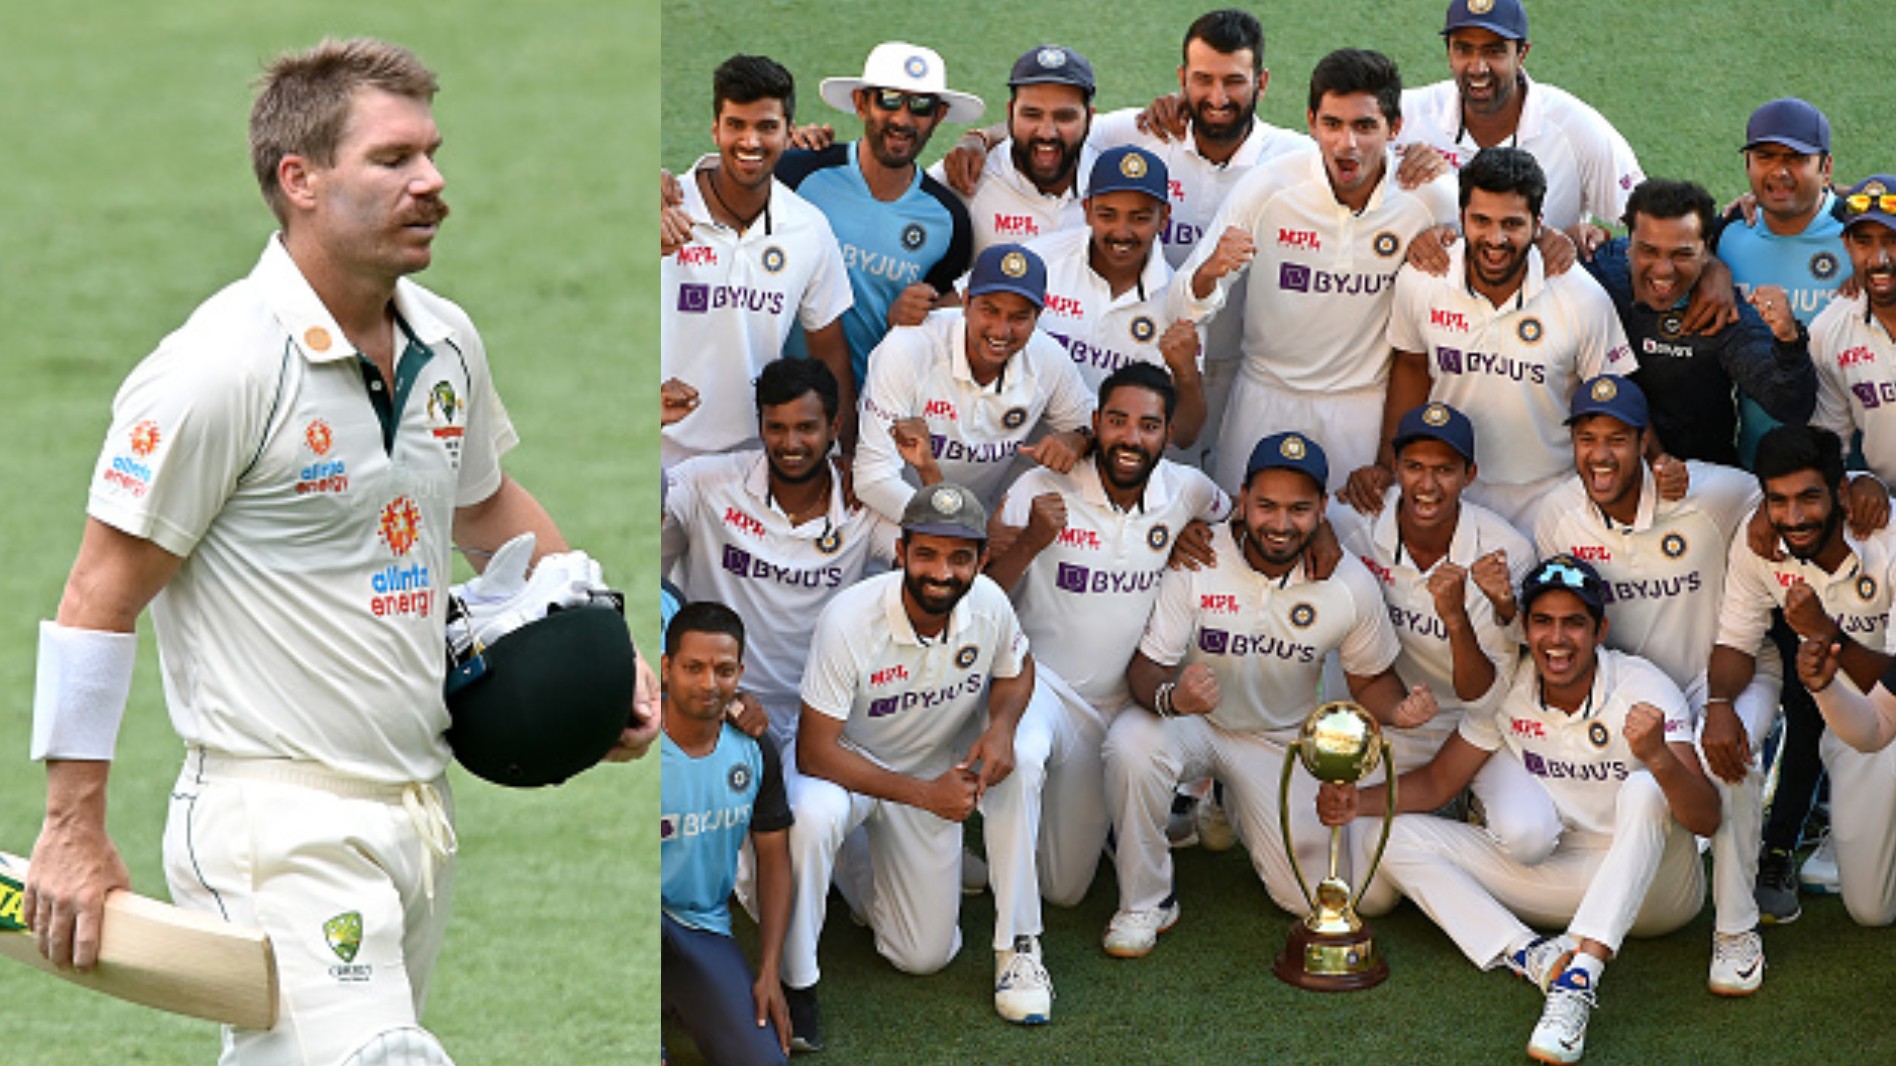 AUS v IND 2020-21: “We were outplayed, Well done Team India” David Warner reflects on Australia’s Test series loss